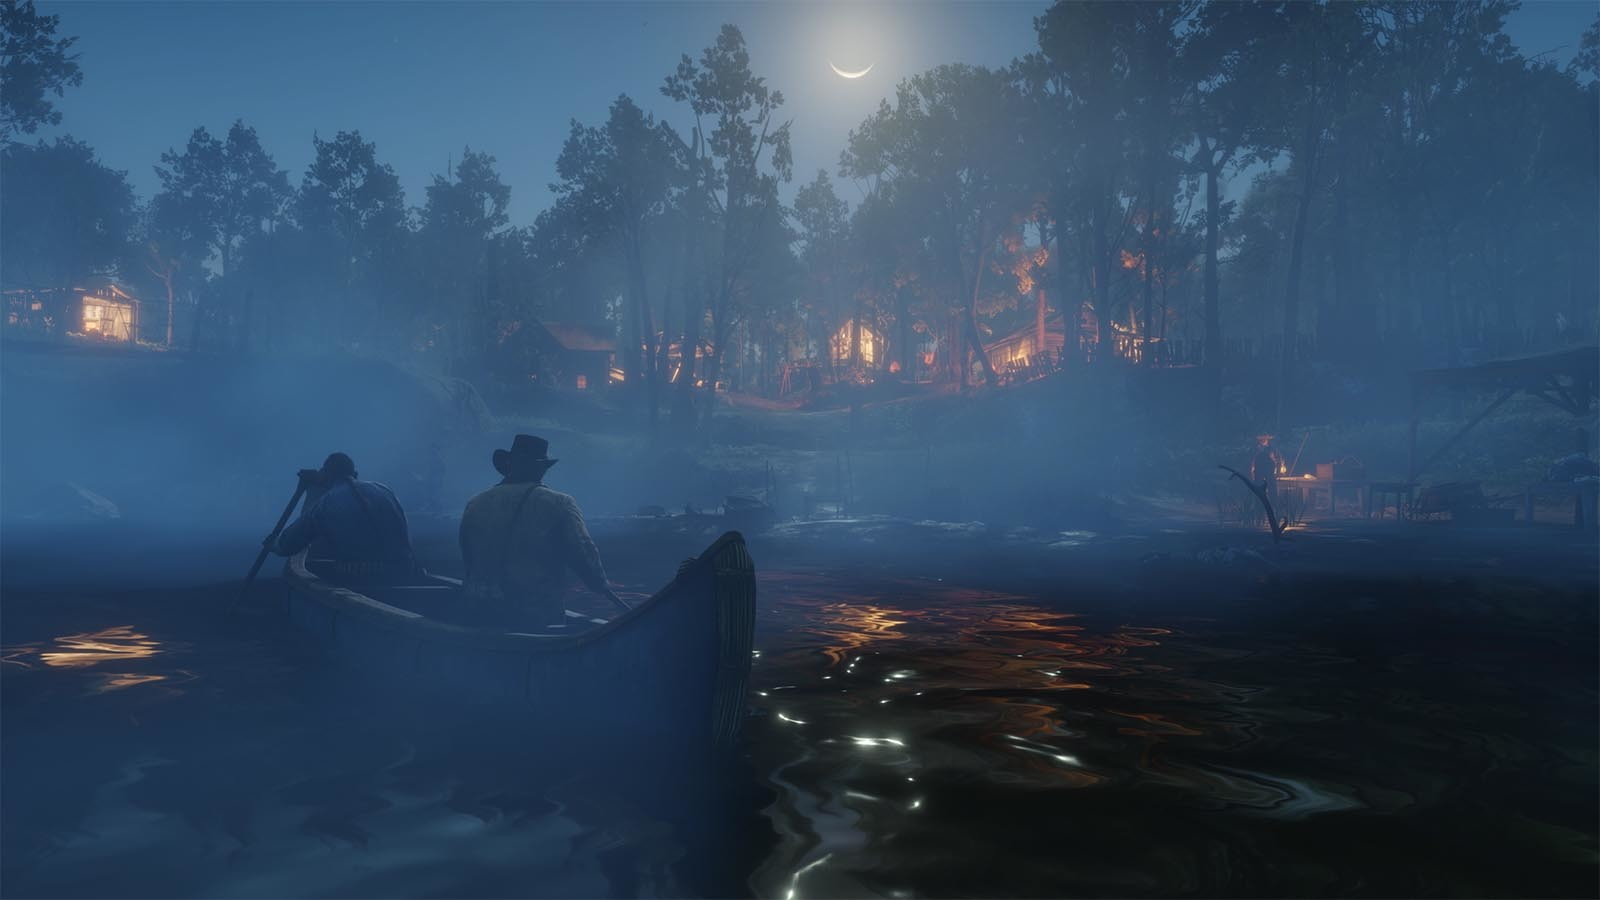 Two characters row a canoe towards a settlement on a moonlit night.